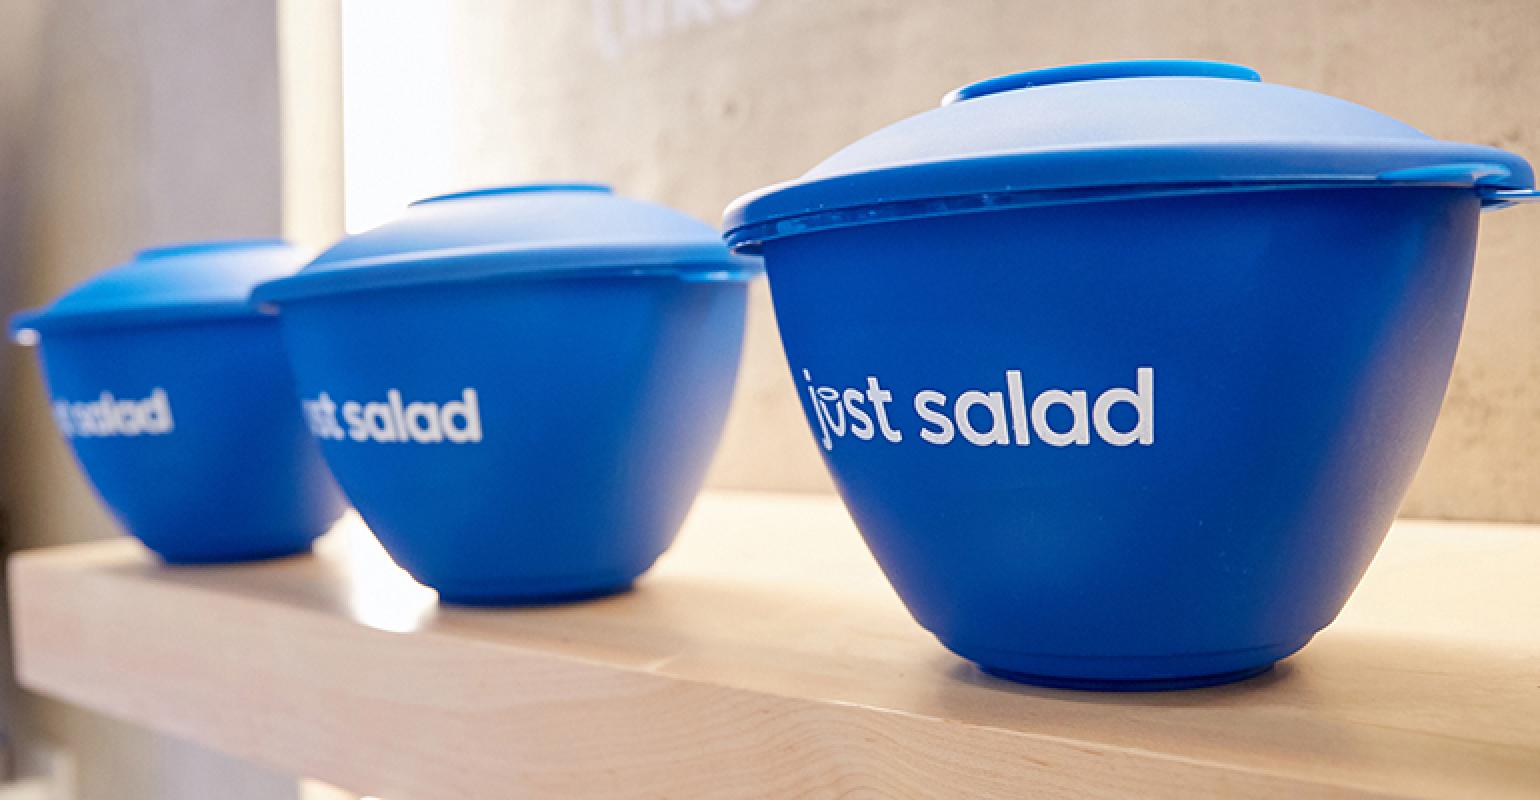 Just Salad makes reusable bowls available for pickup orders